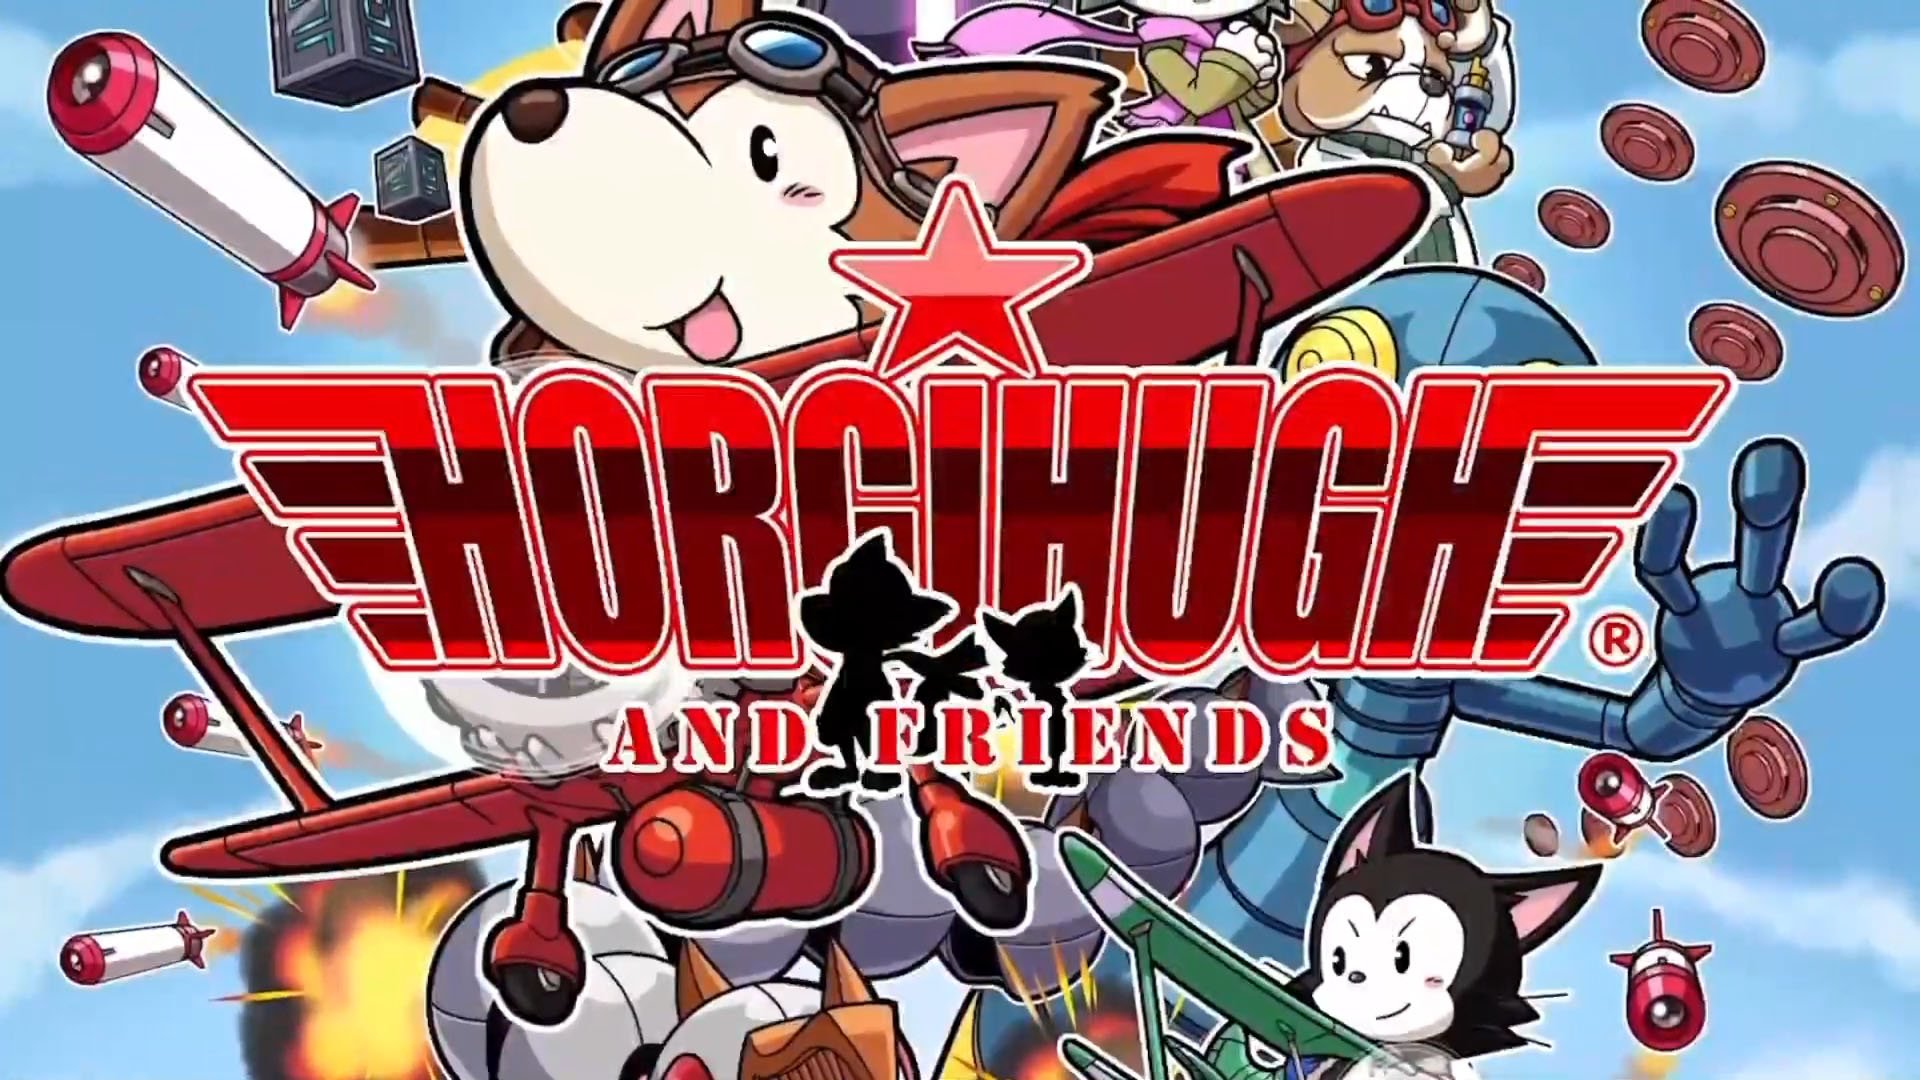 #
      Horgihugh and Friends launches June 16 in the west